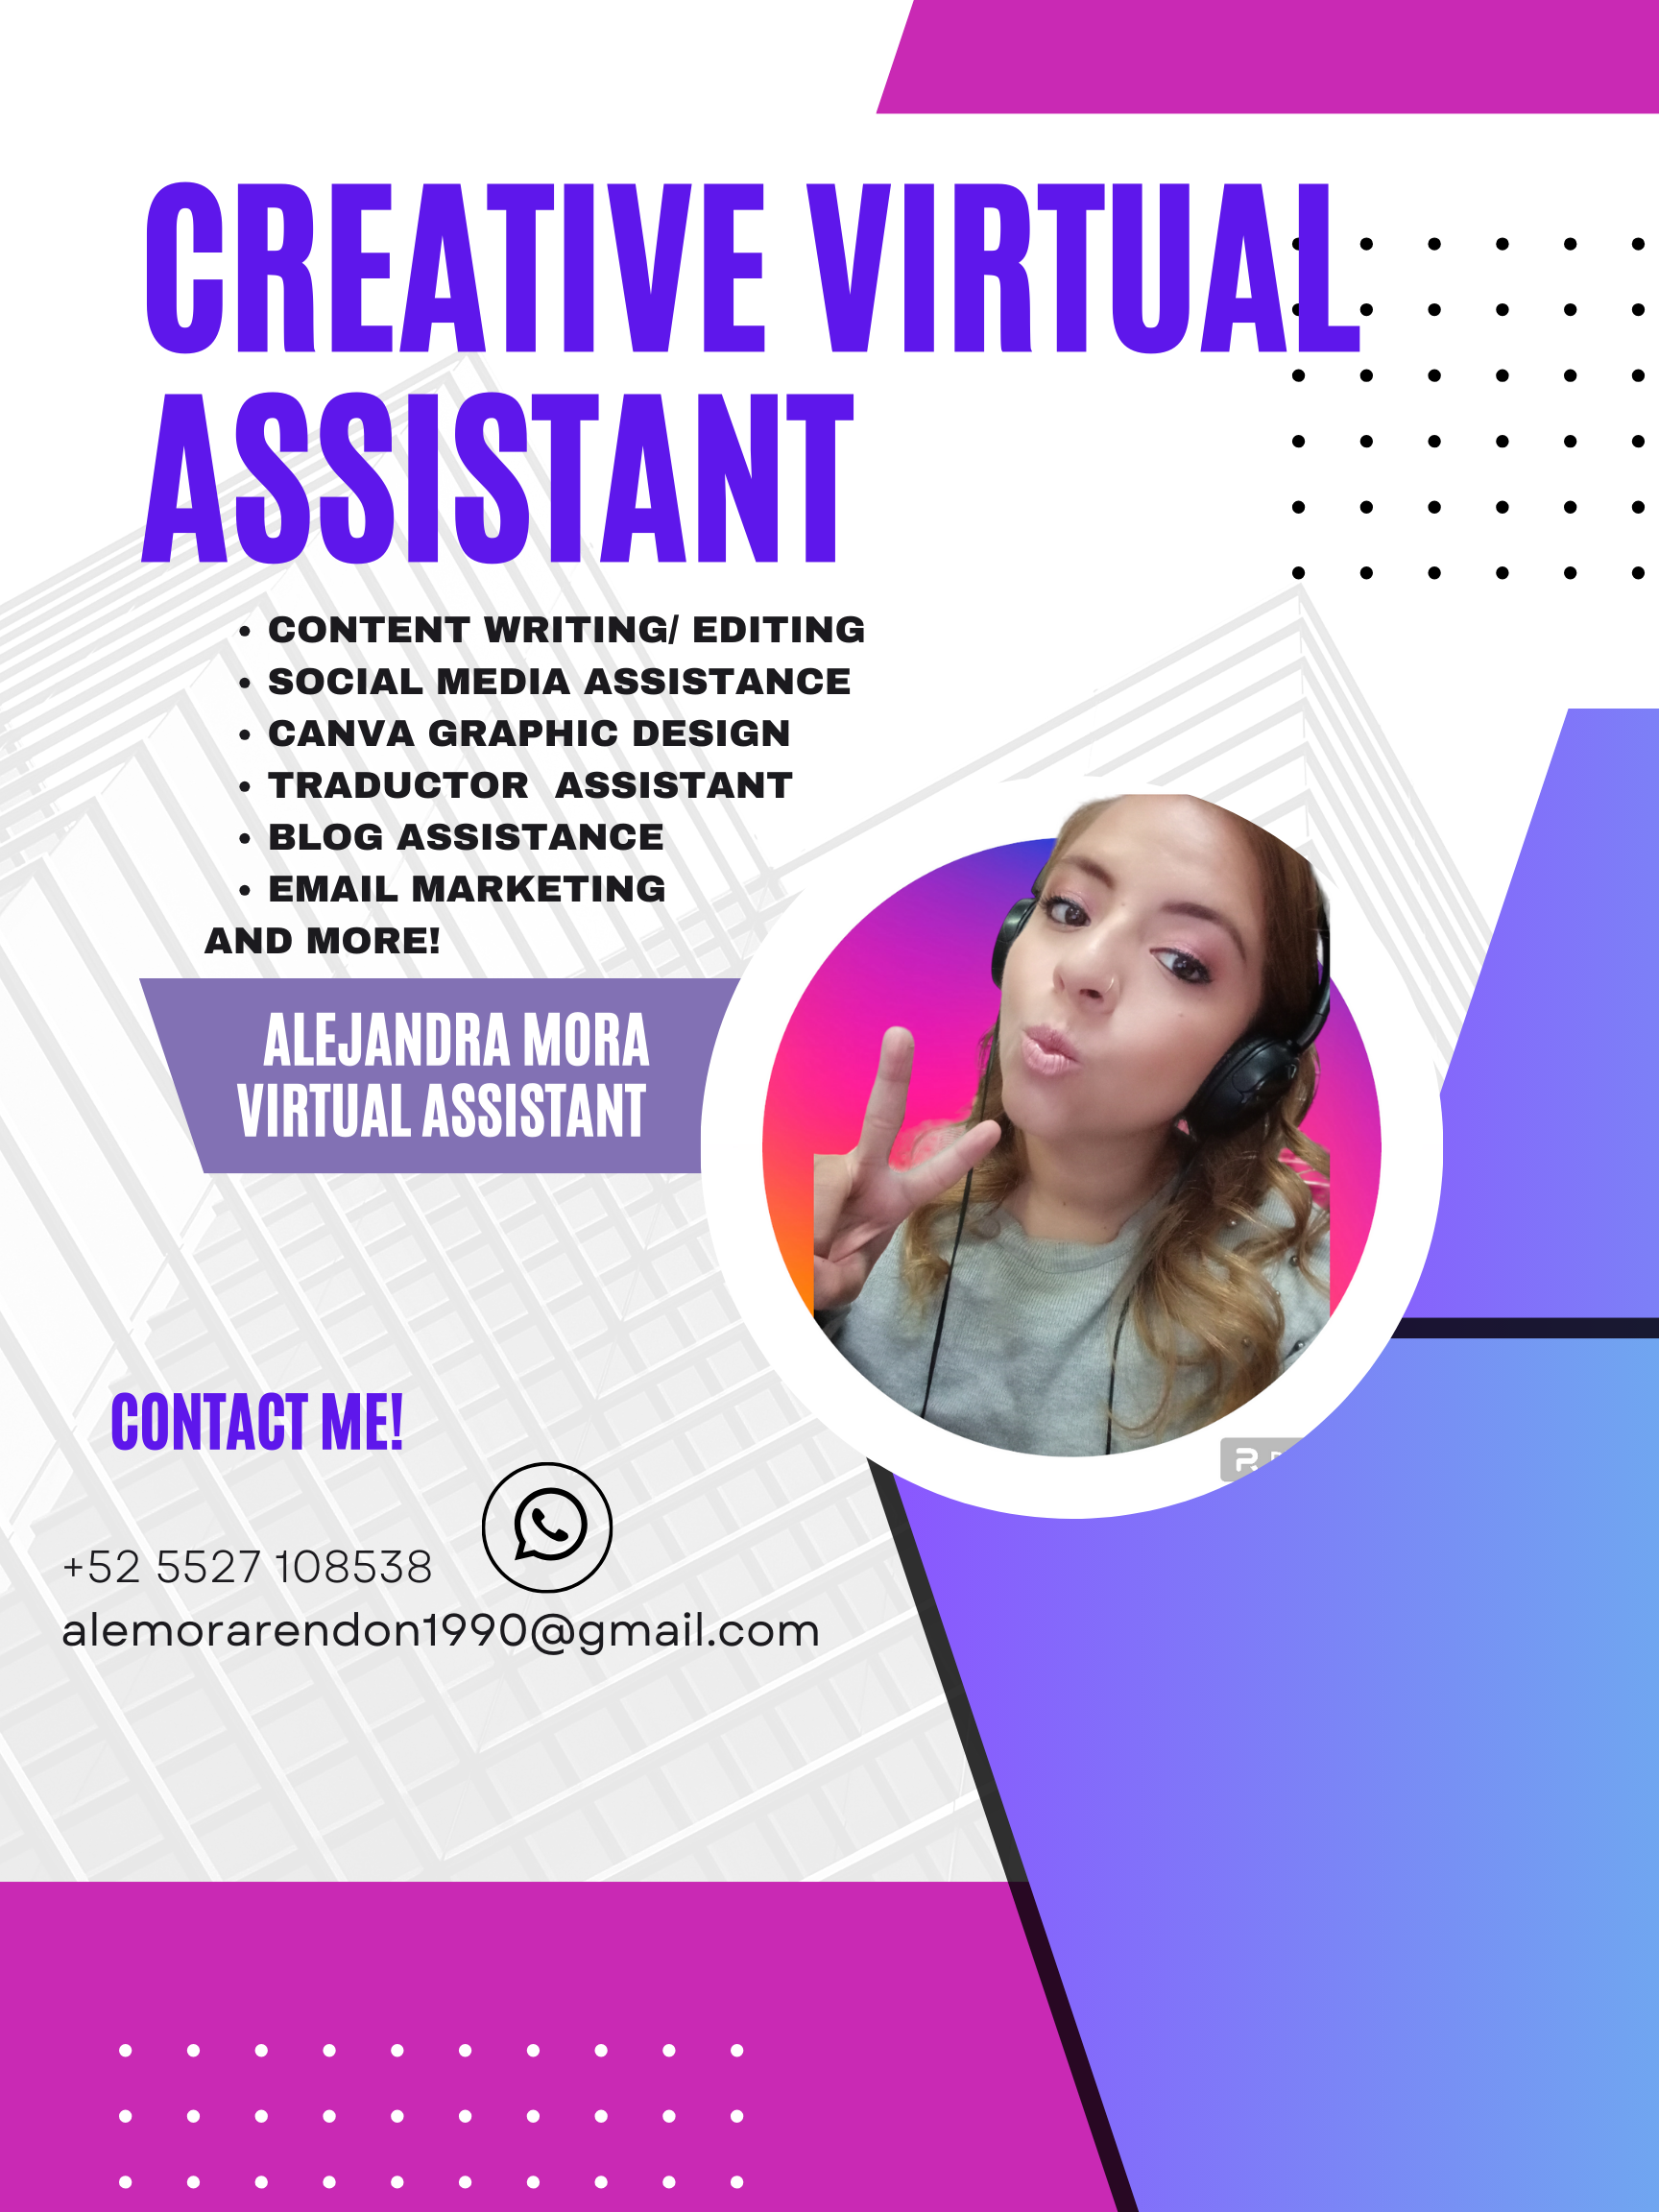 A SS STA NI cere
oe © eo oo oo oo
+ CONTENT WRITING/ EDITING
« SOCIAL MEDIA ASSISTANCE
« CANVA GRAPHIC DESIGN
*« TRADUCTOR ASSISTANT
« BLOG ASSISTANCE
« EMAIL MARKETING
AND MORE!

   
 
 
  
 
 
 
   

 

ALEJANDRA MORA
LTTE ERR

CONTACT ME!

+52 5527108538
alemorarendon1990@gmail.com